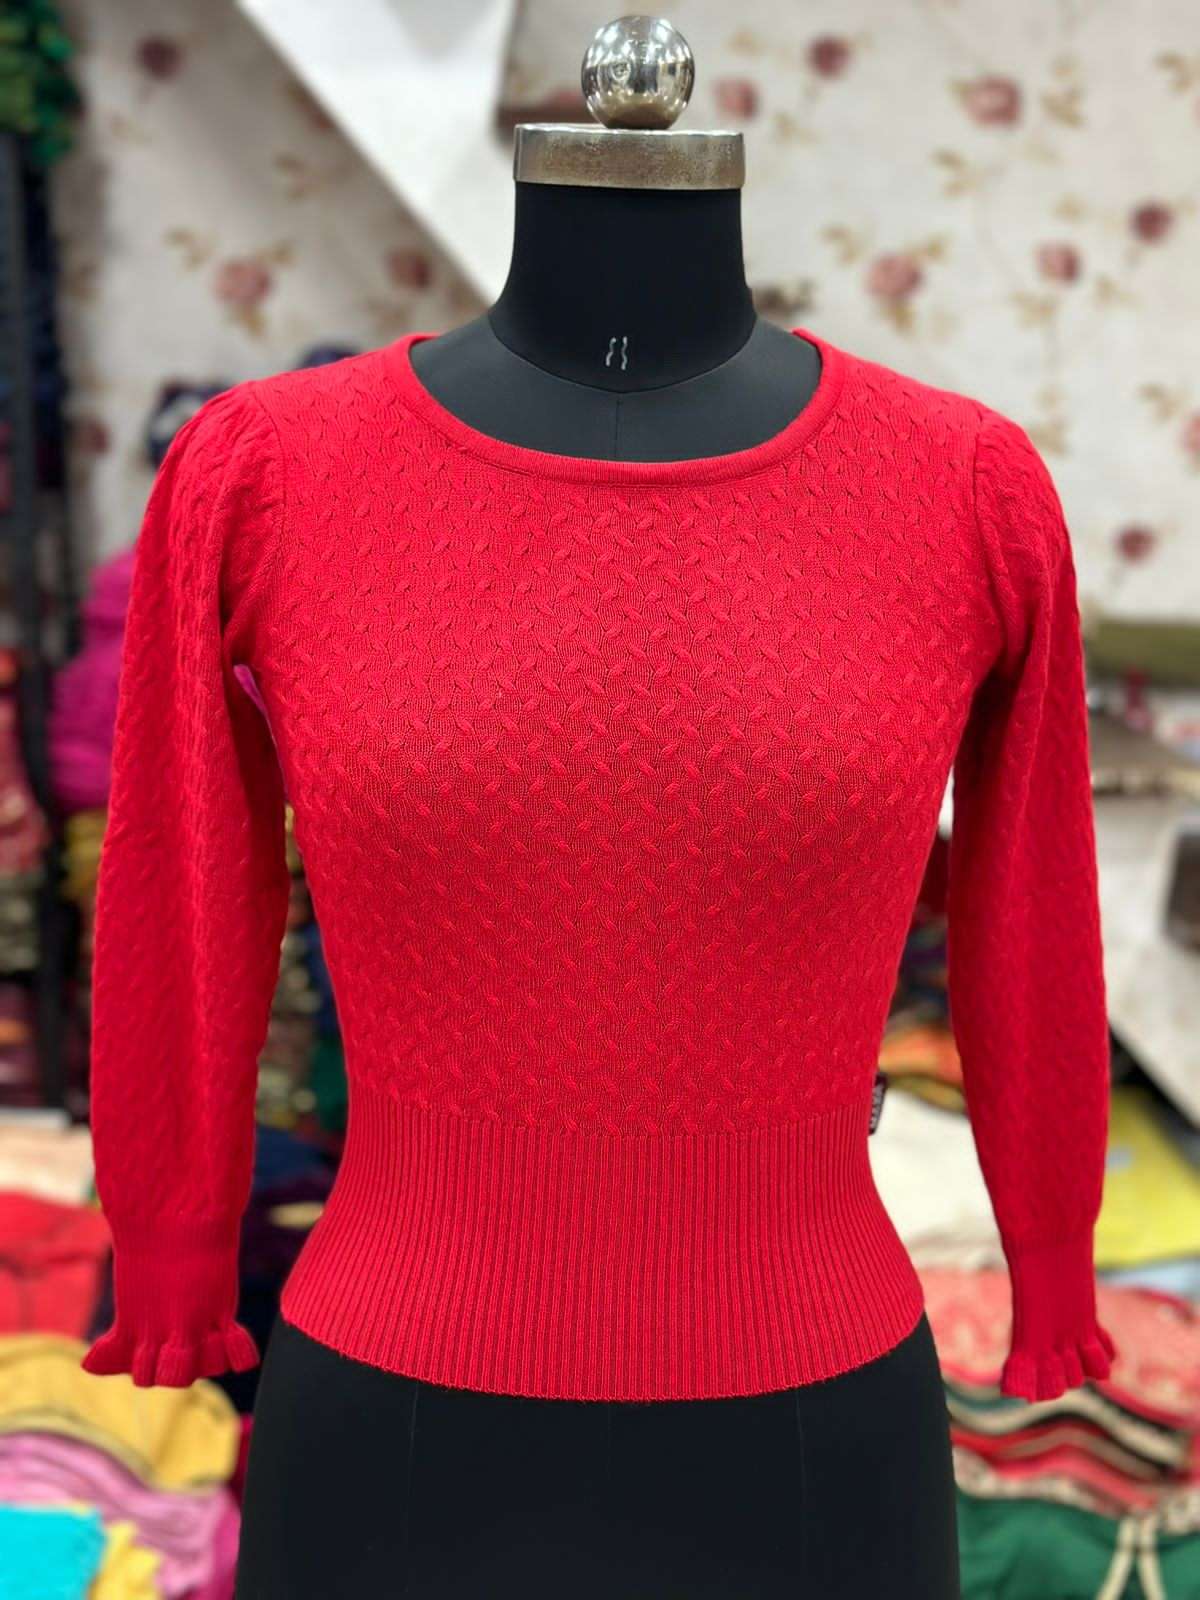 only blouse blousewala our most demanding winter special woolen blouses woolen blouse 2 thermal blouse winter special free size 32 to 44 